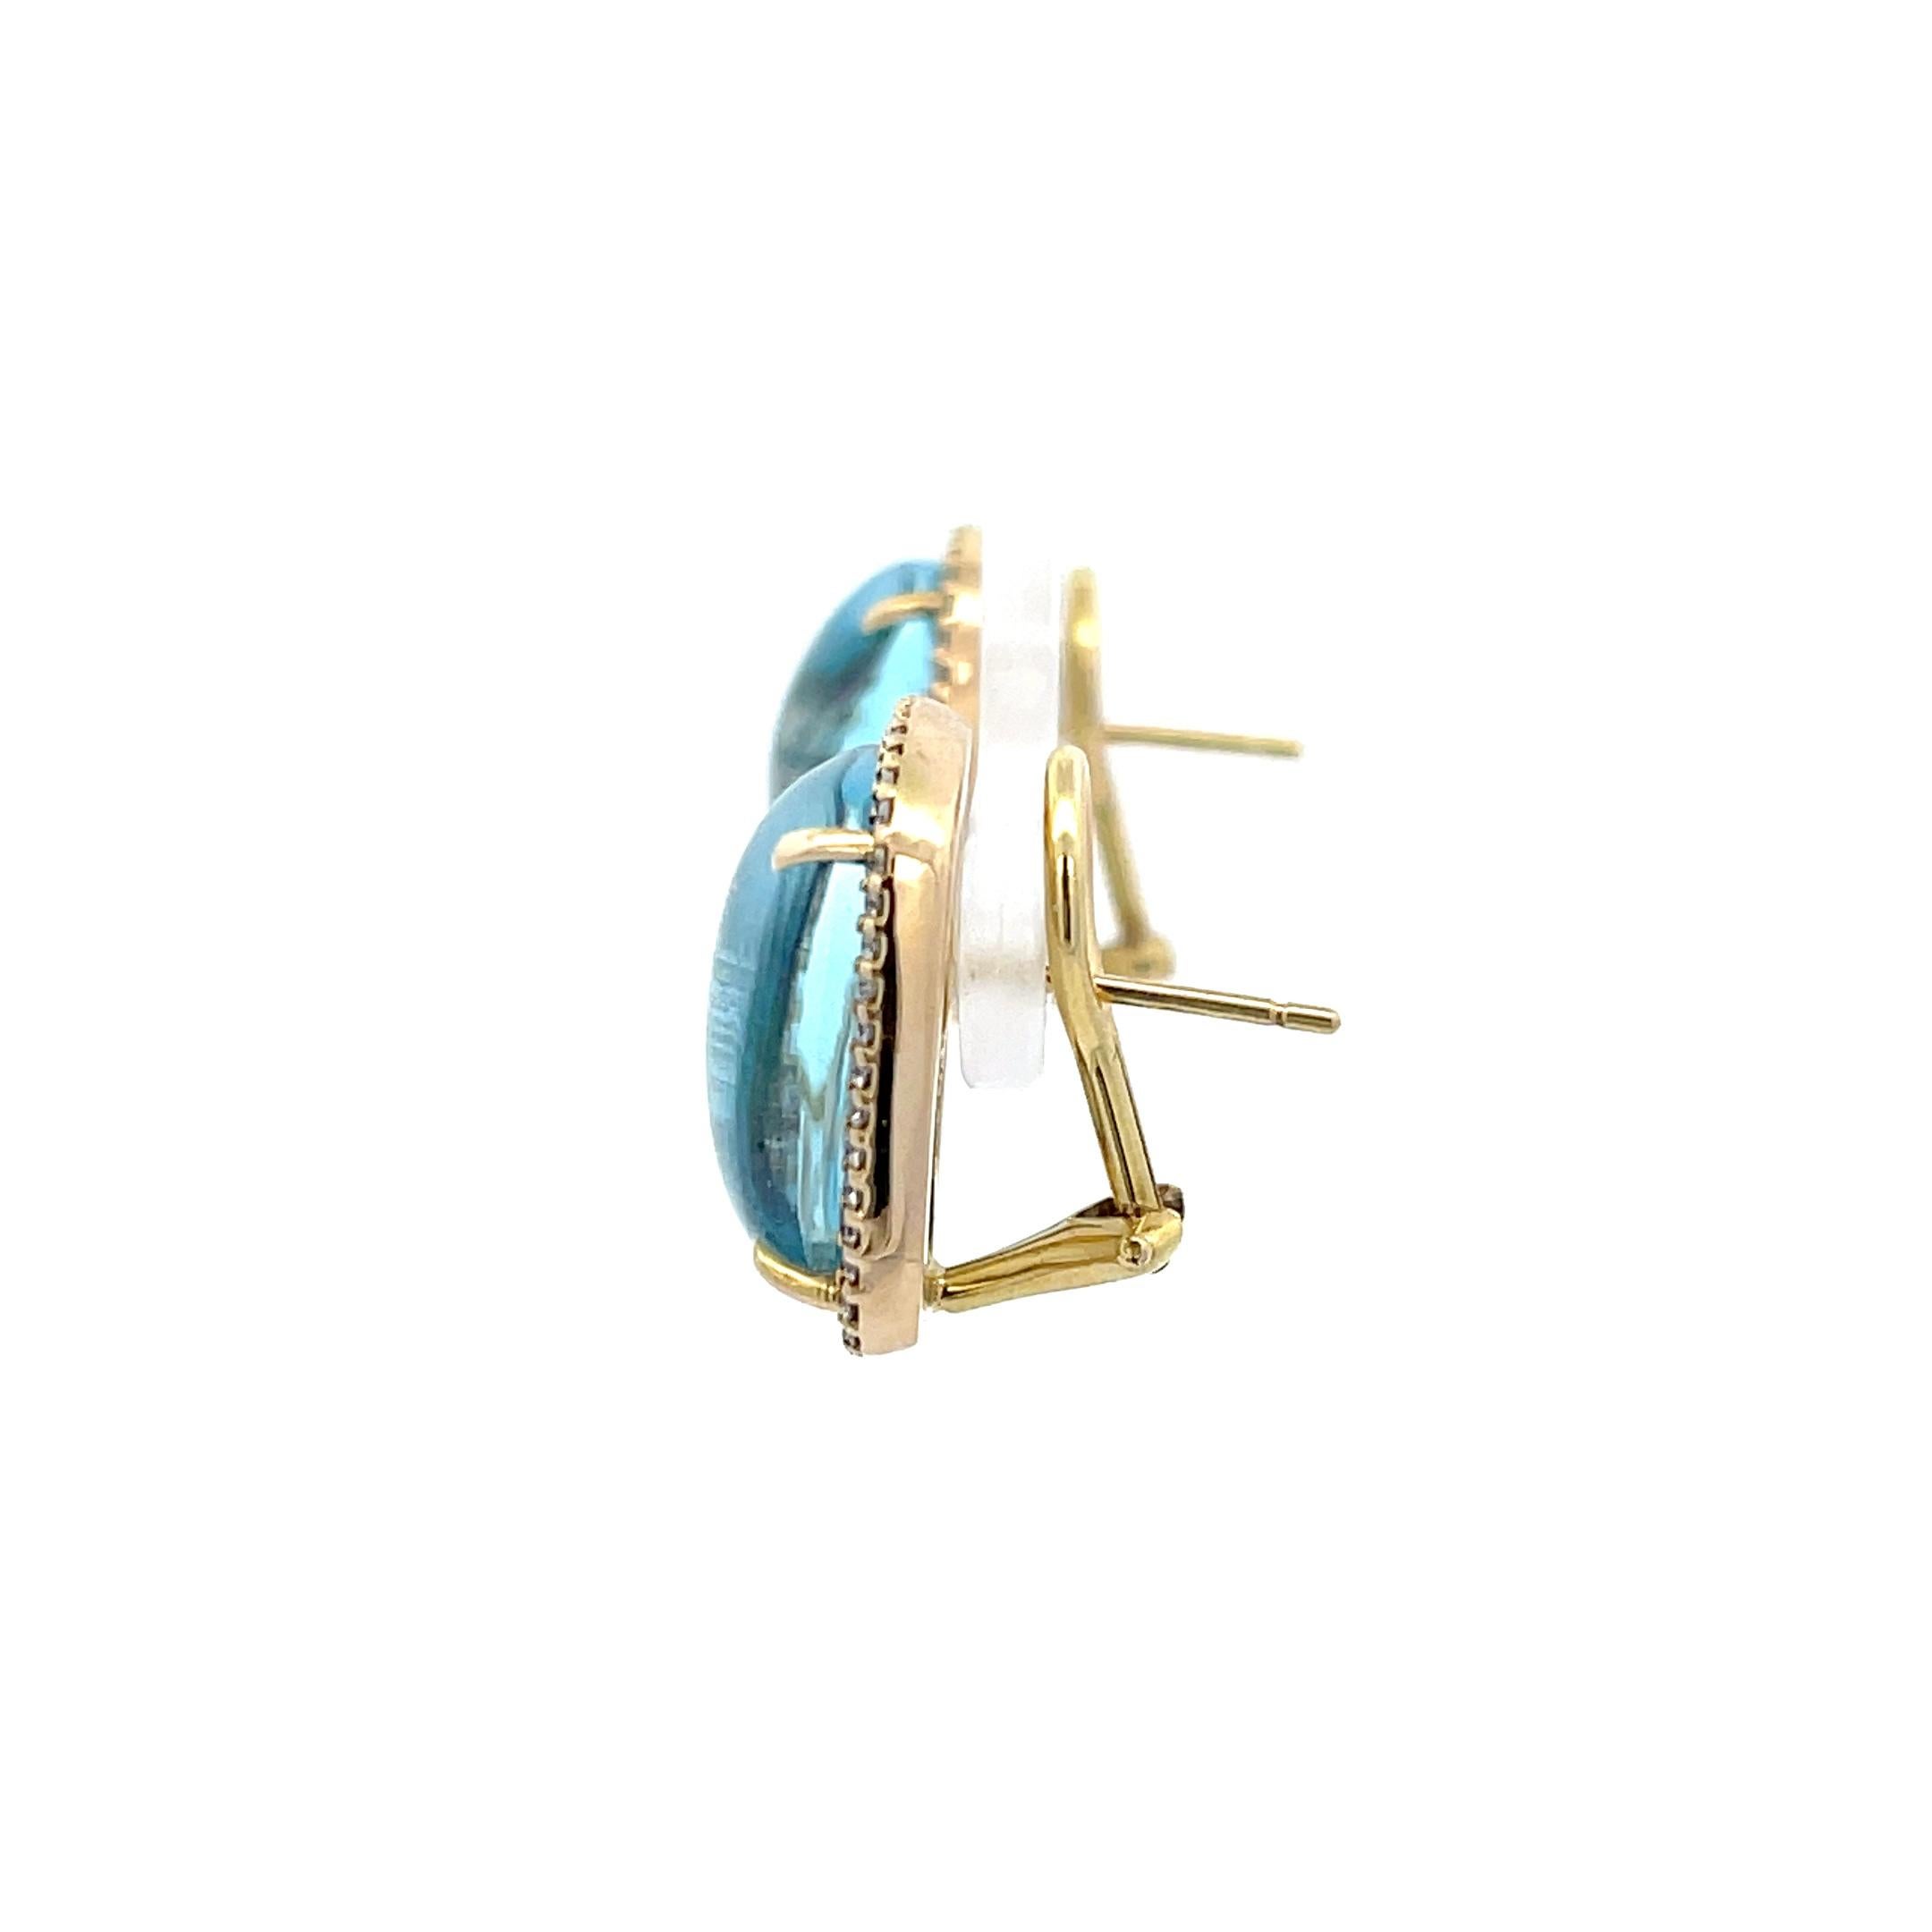 Mazza Cabochon Blue Topaz, Diamond, and Mother of Pearl Clip On Earrings in 14K Yellow Gold. The earrings feature 0.44ctw of Round Diamonds.